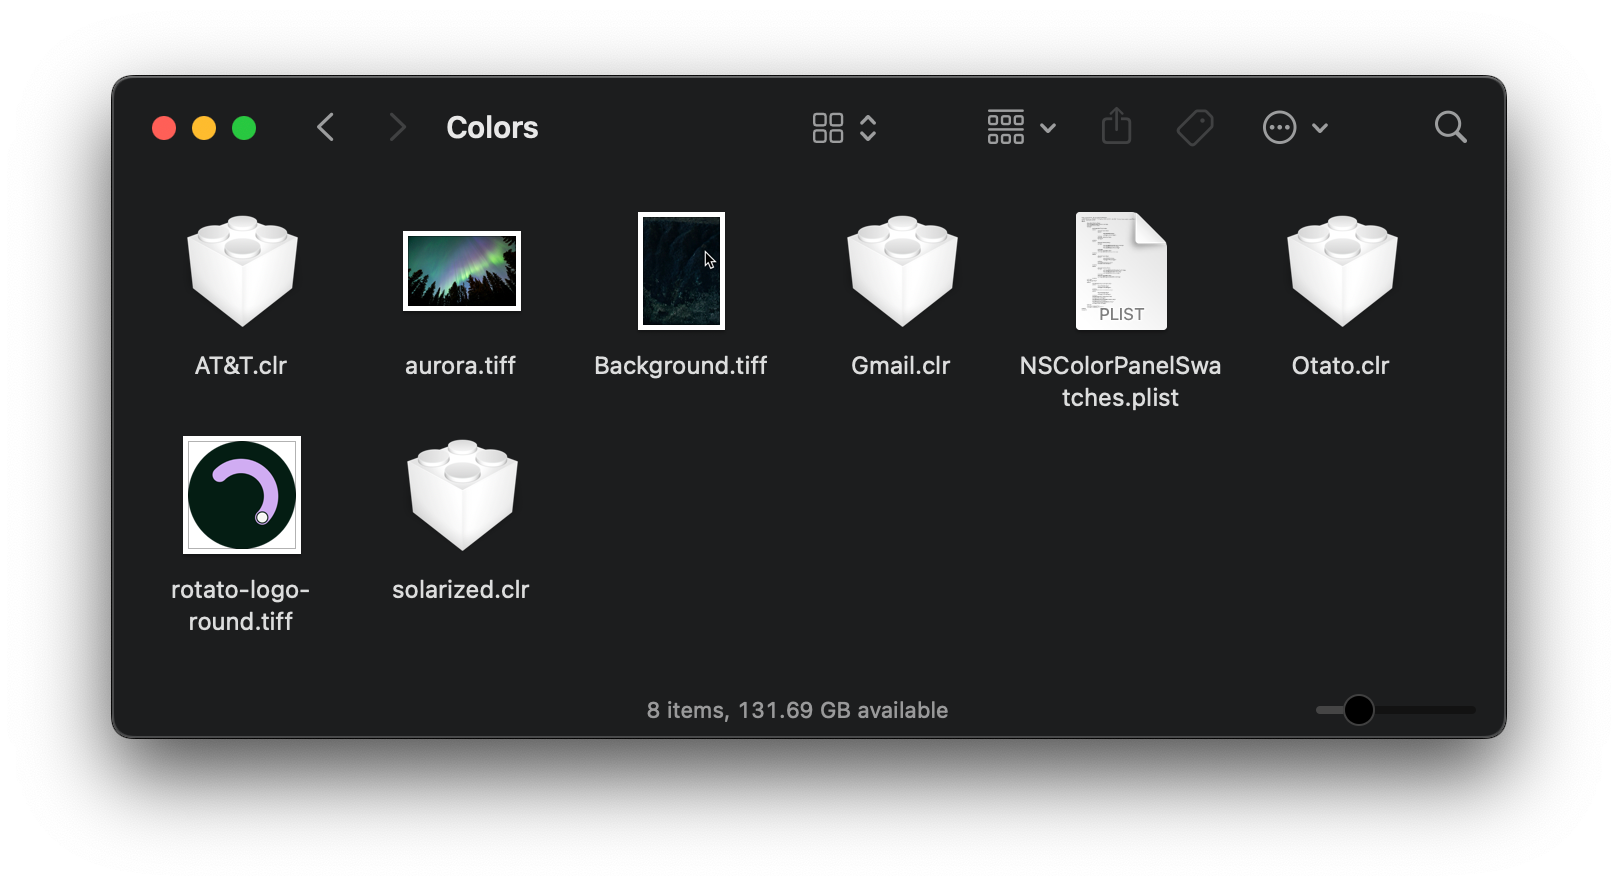 A screenshot of Finder showing the Colors folder in the Library